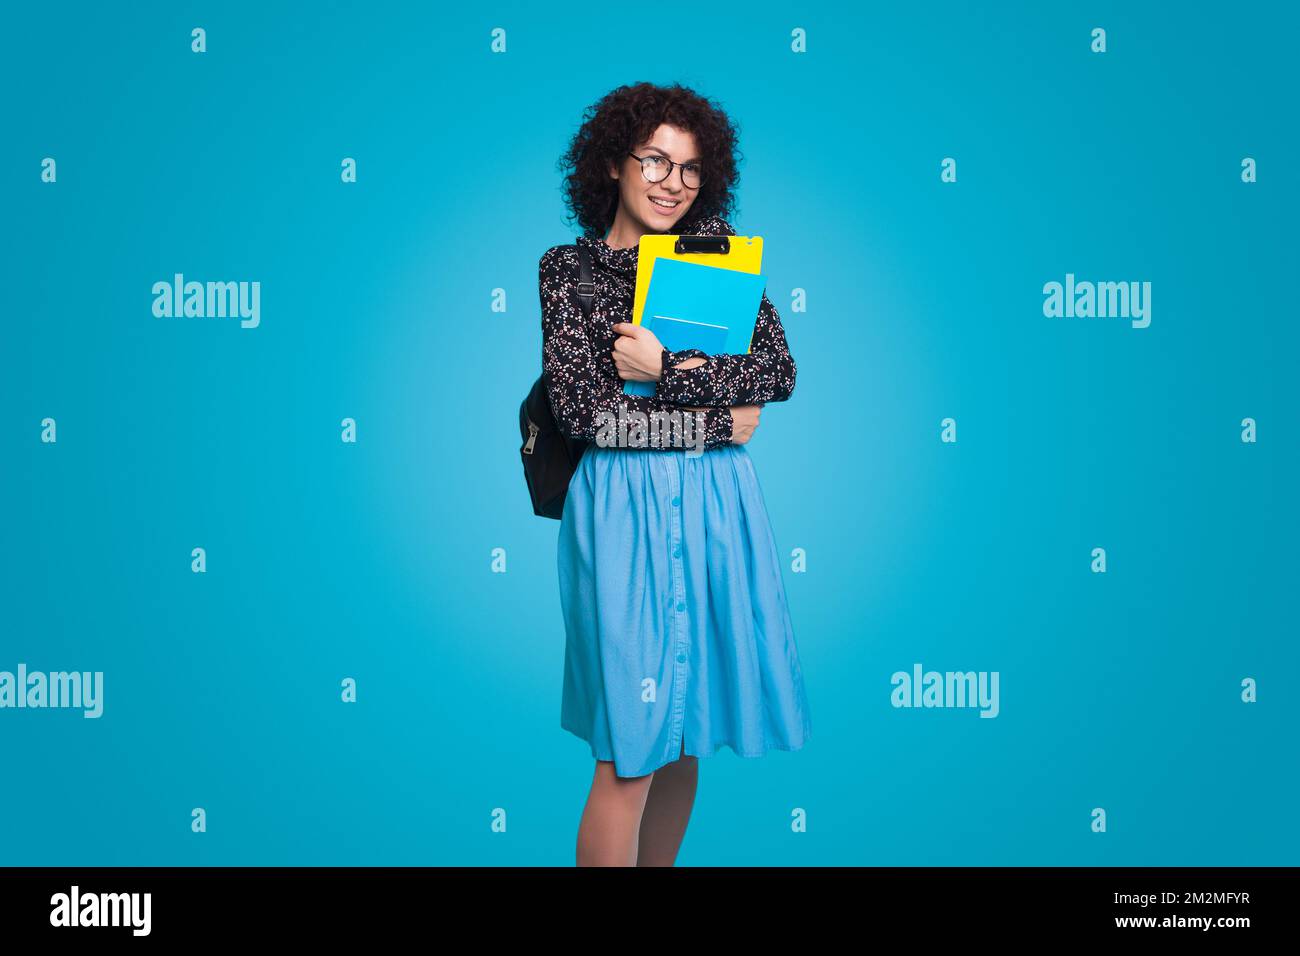 Young student woman with curly hair holding notebooks posing smiling isolated over blue background. . People lifestyle concept. Creative concept idea. Stock Photo